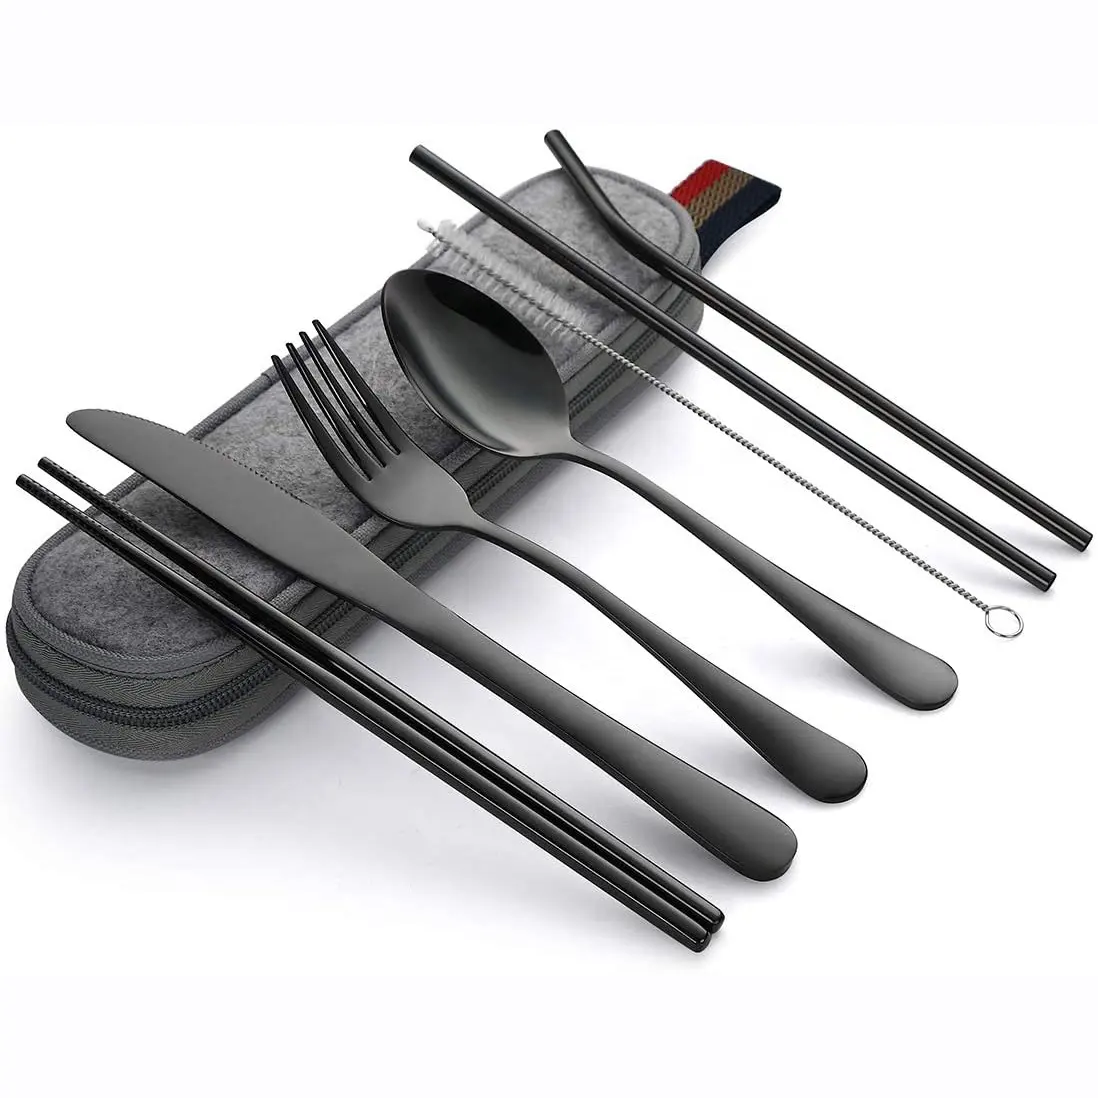 2020 Travel Camping Kitchen 410 Stainless Steel portable utensil set with case cutlery set stainless steel Cutlery Set